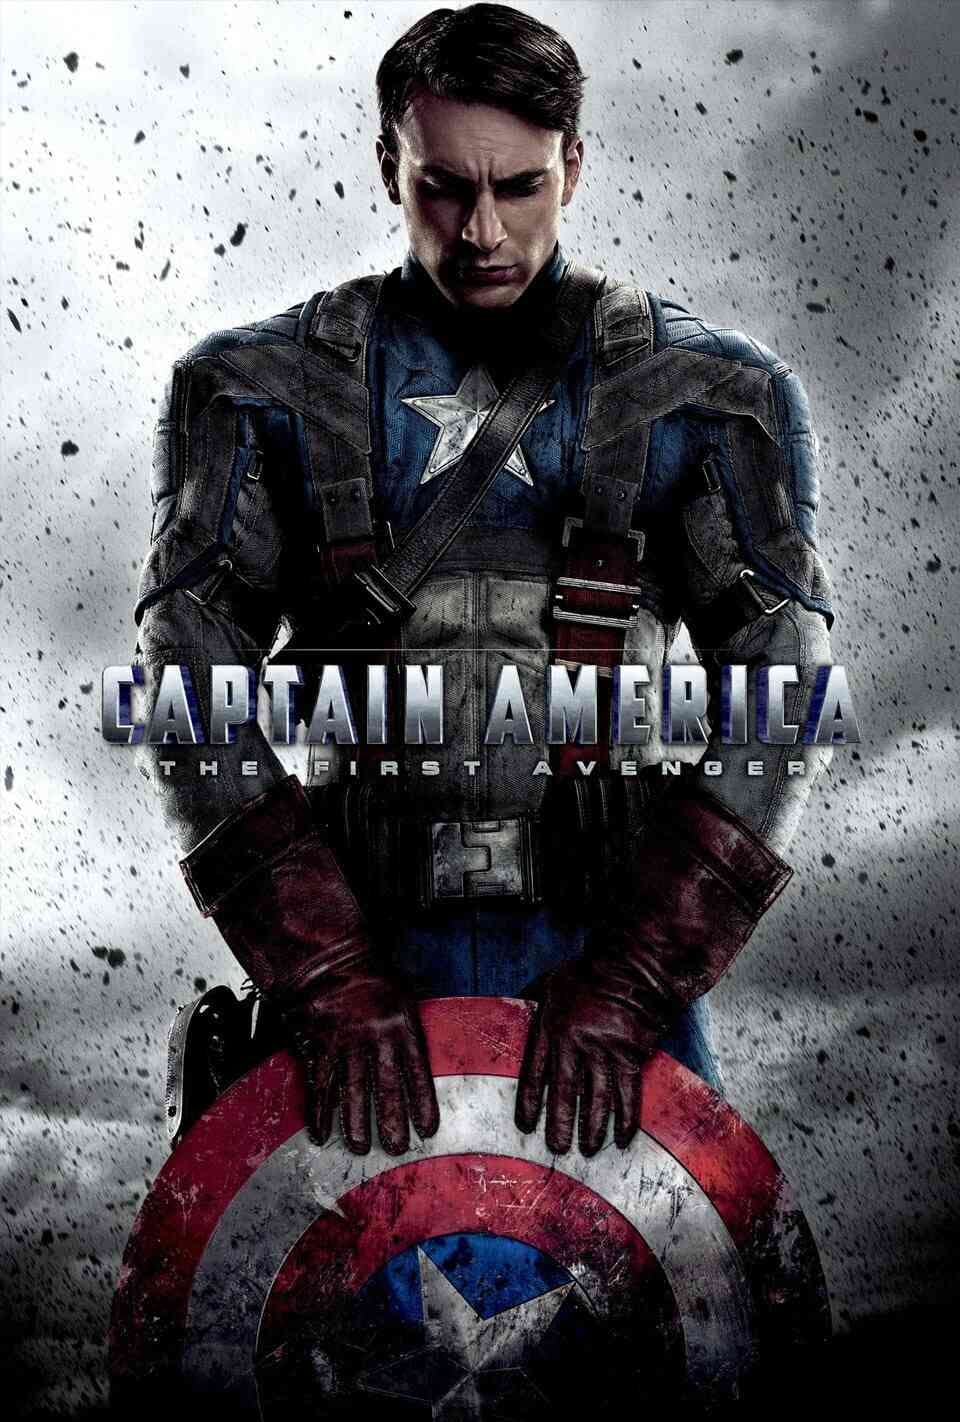 Read The First Avenger screenplay.